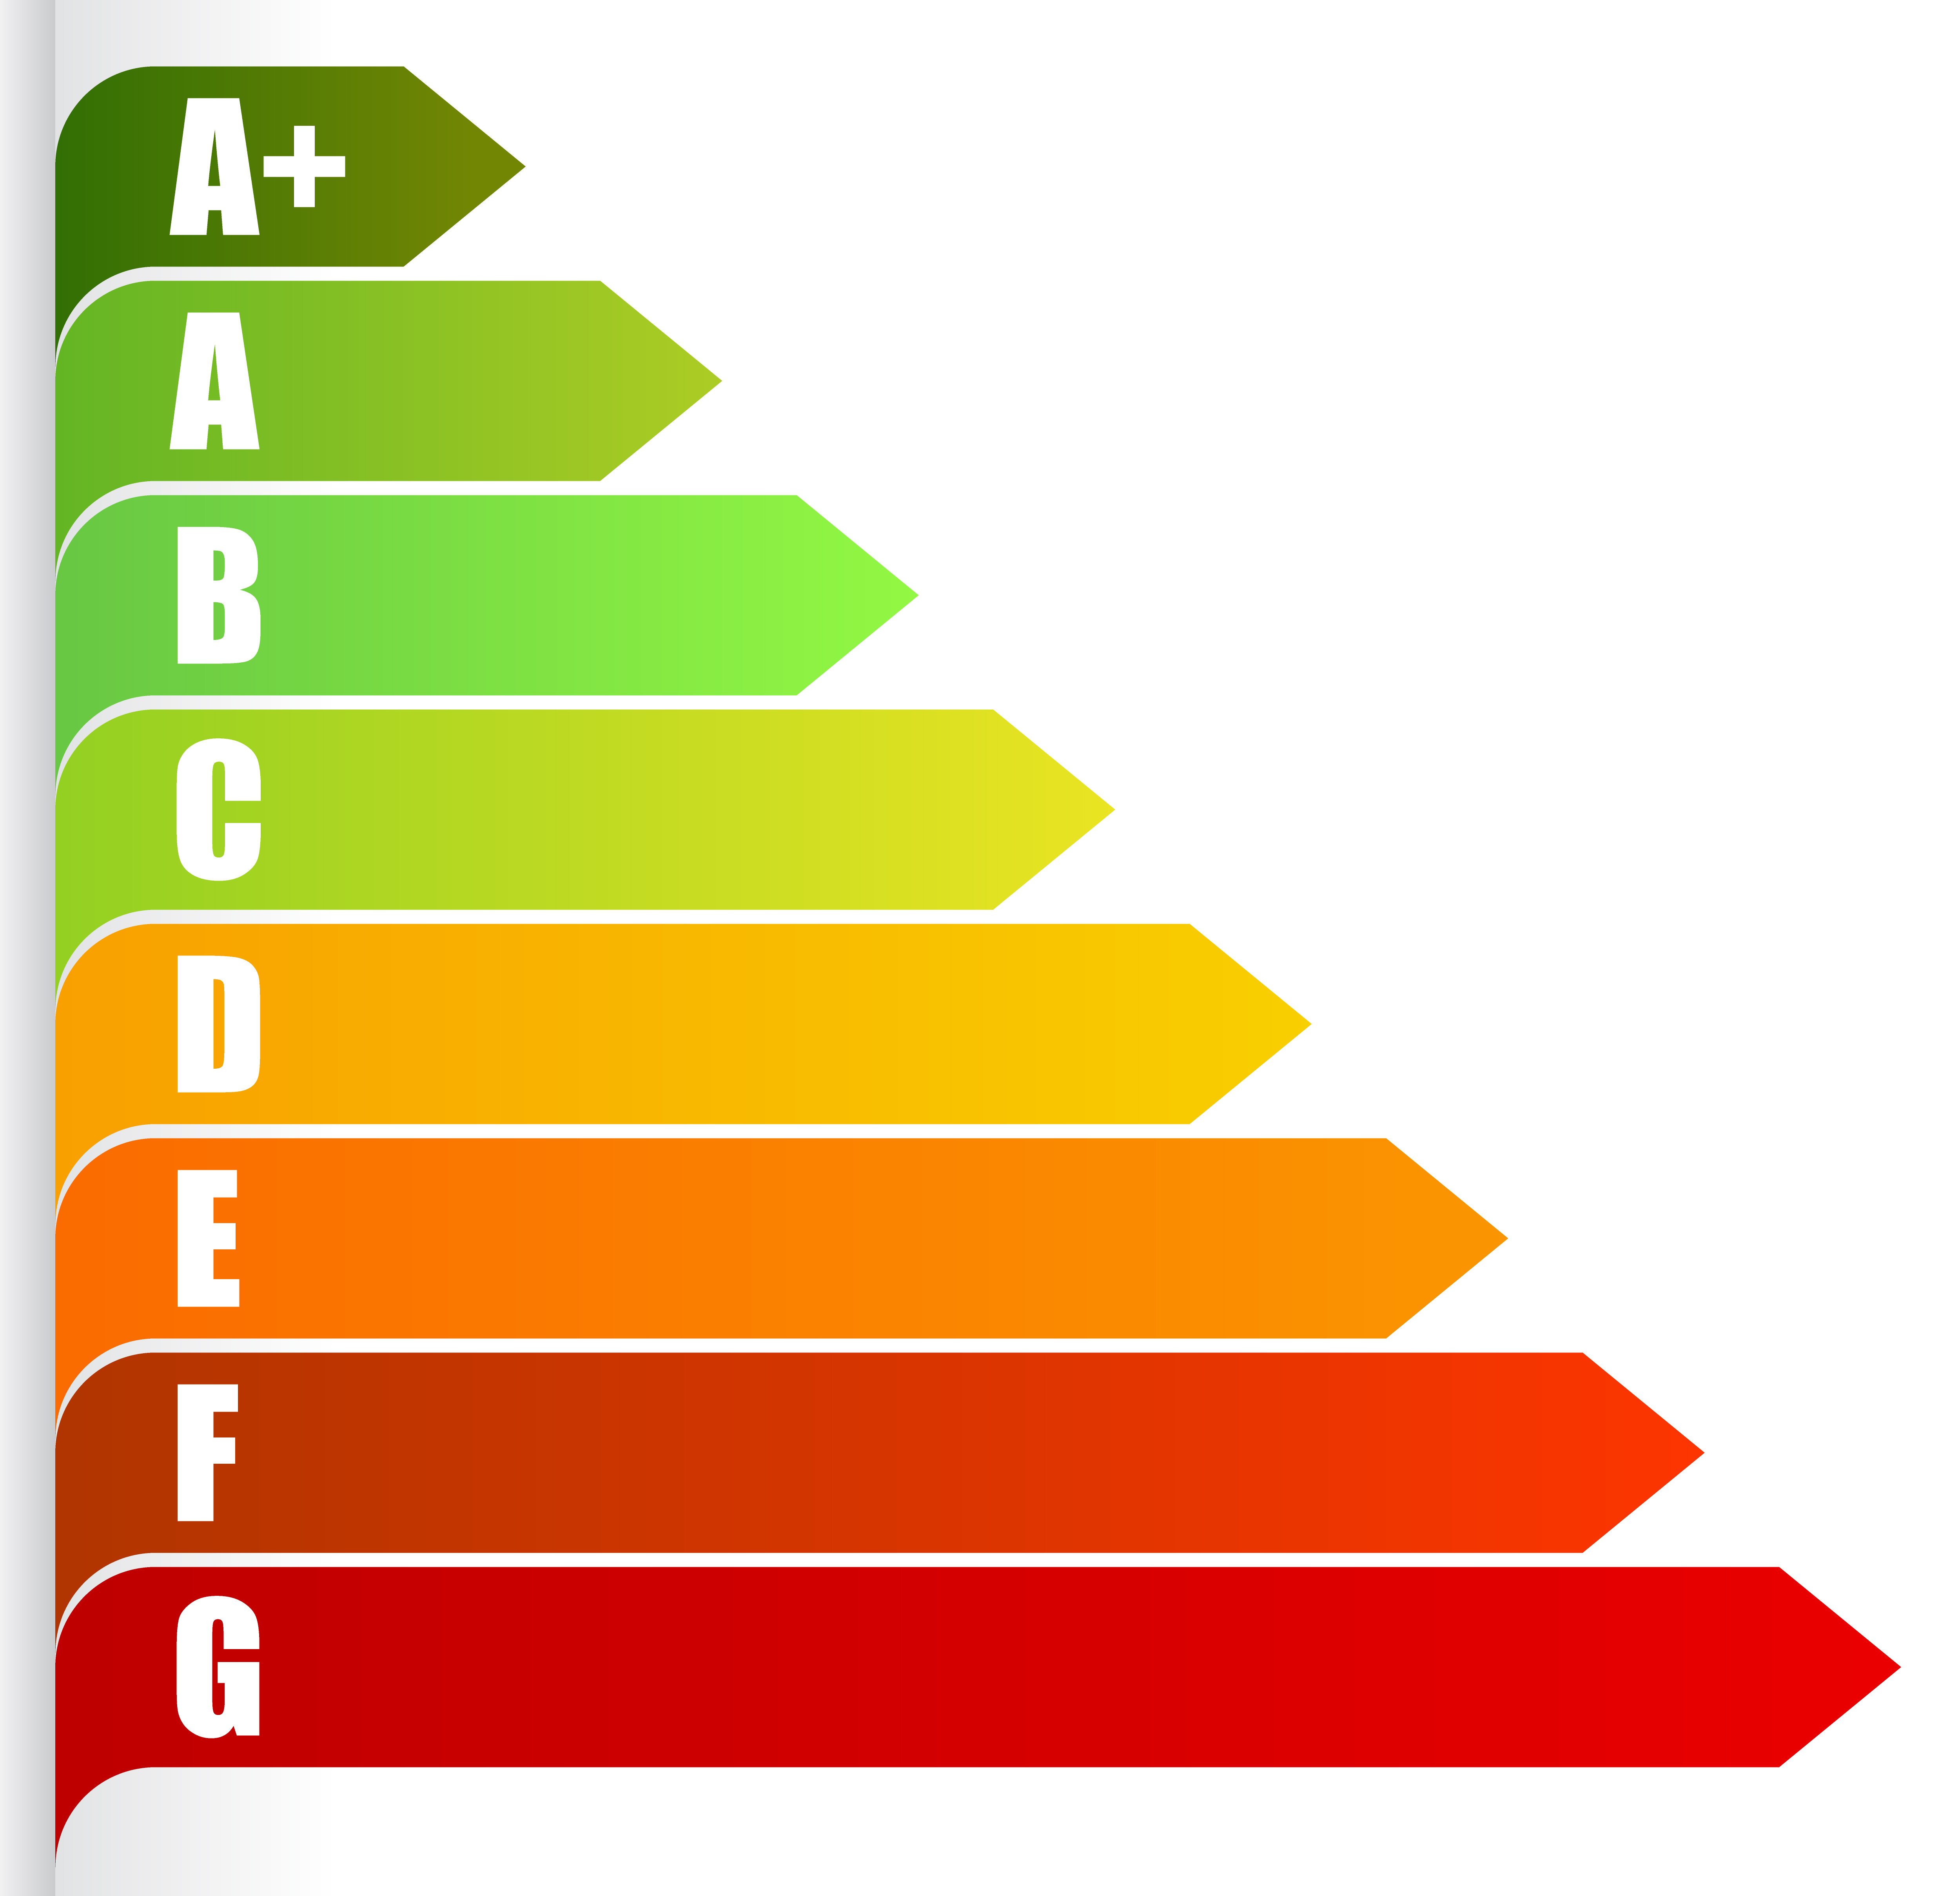 Energy Rating Certificate, Energy Performance Certificates. Energy efficiency, energy consumption rating for houses, homes, buildings